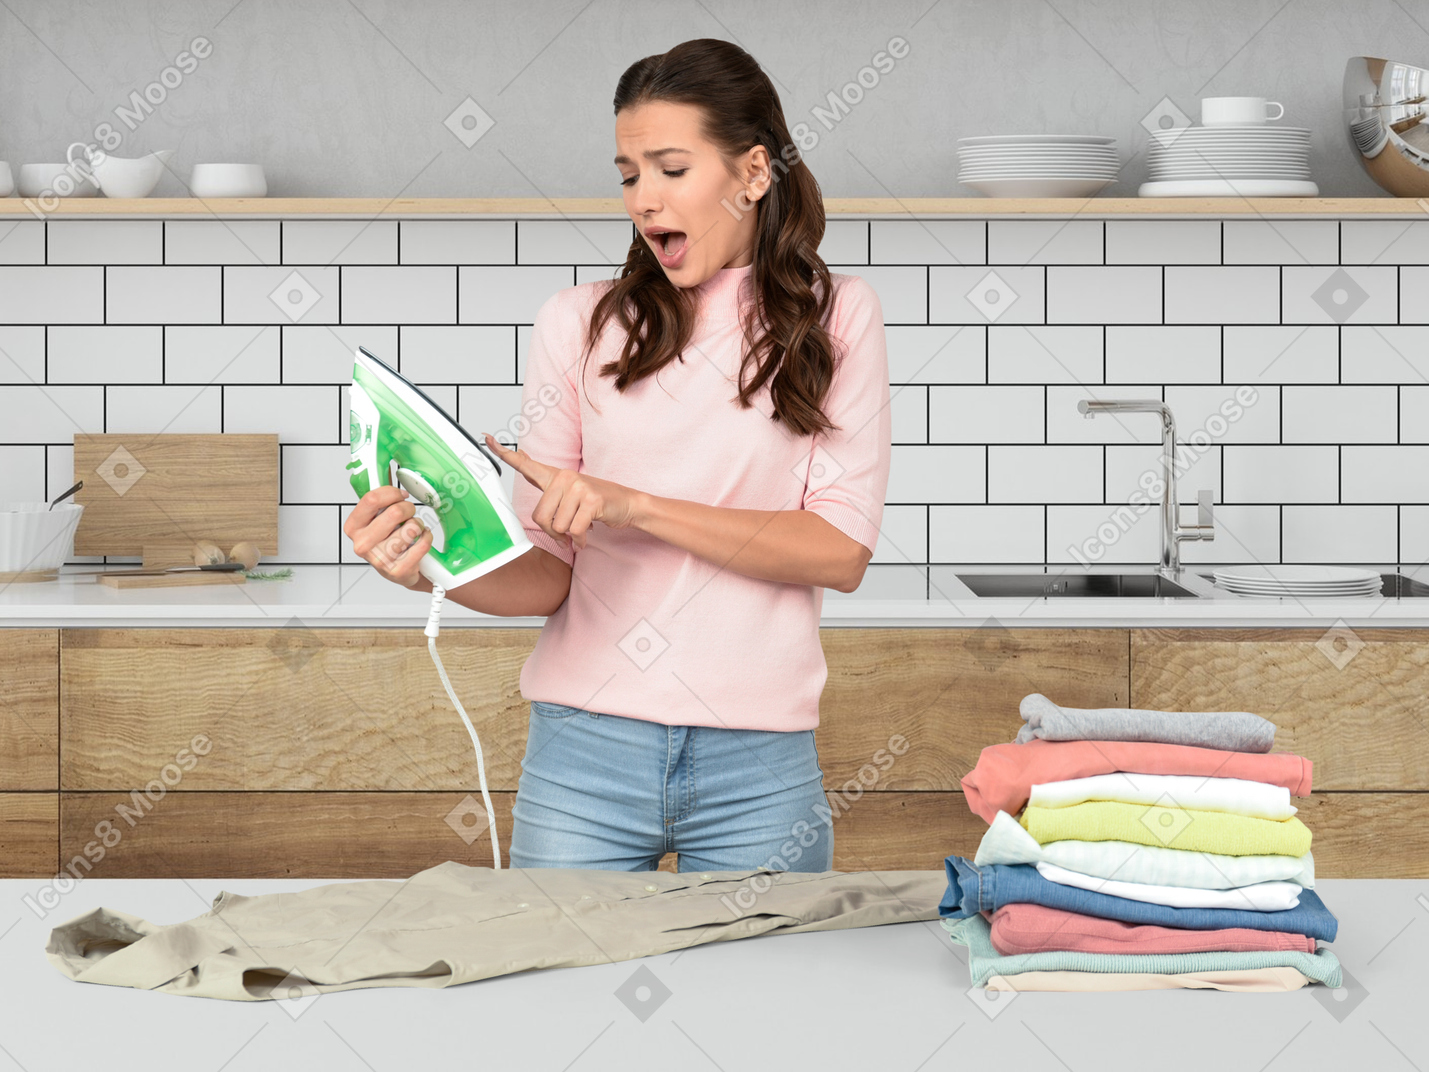 Woman cleaning the floor in her kitchen